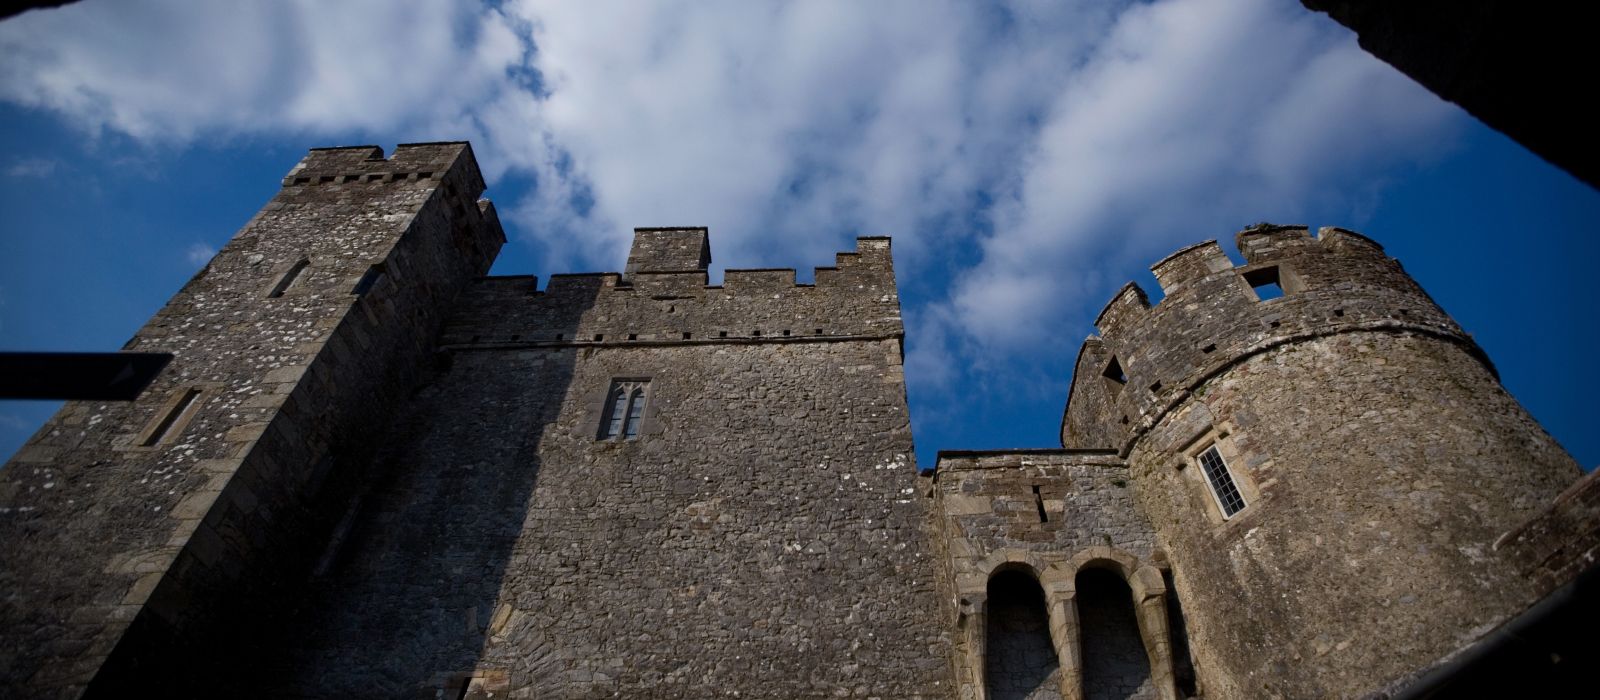 Cahir Castle, accommodation by Discover Ireland Tours Destination Management Company